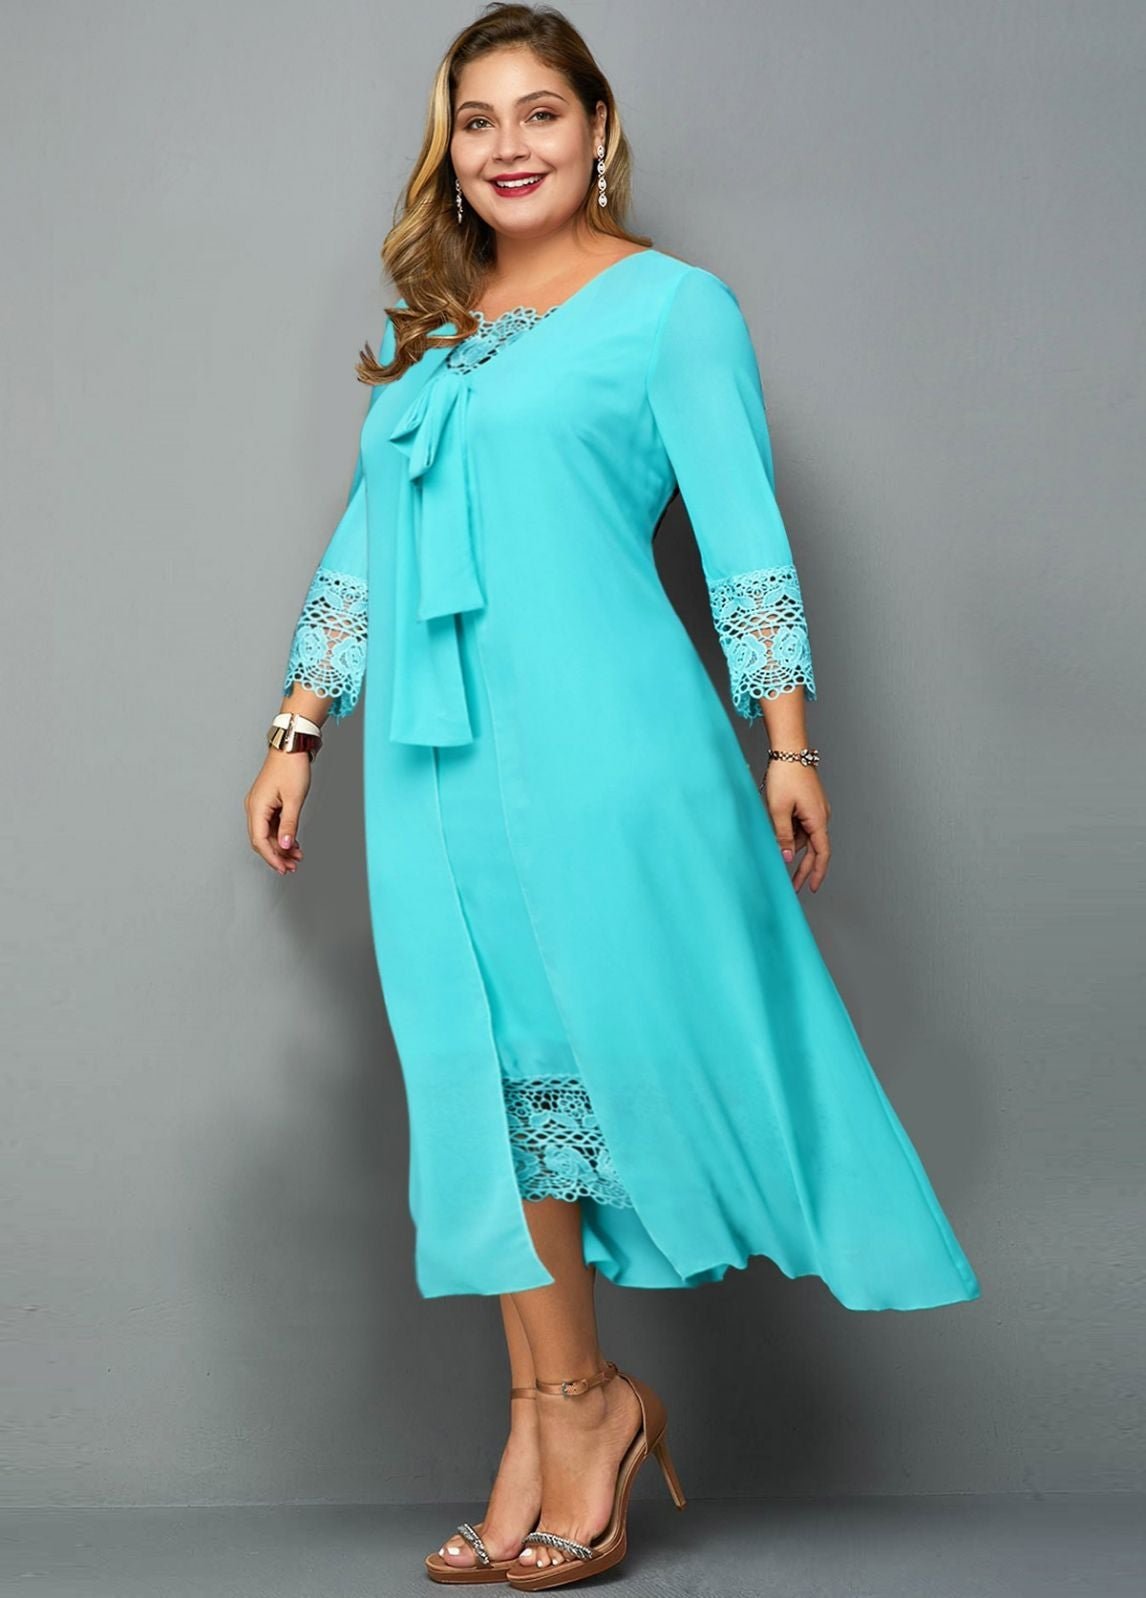 Discounted Women´s Teal Chiffon Layered Front Tie 